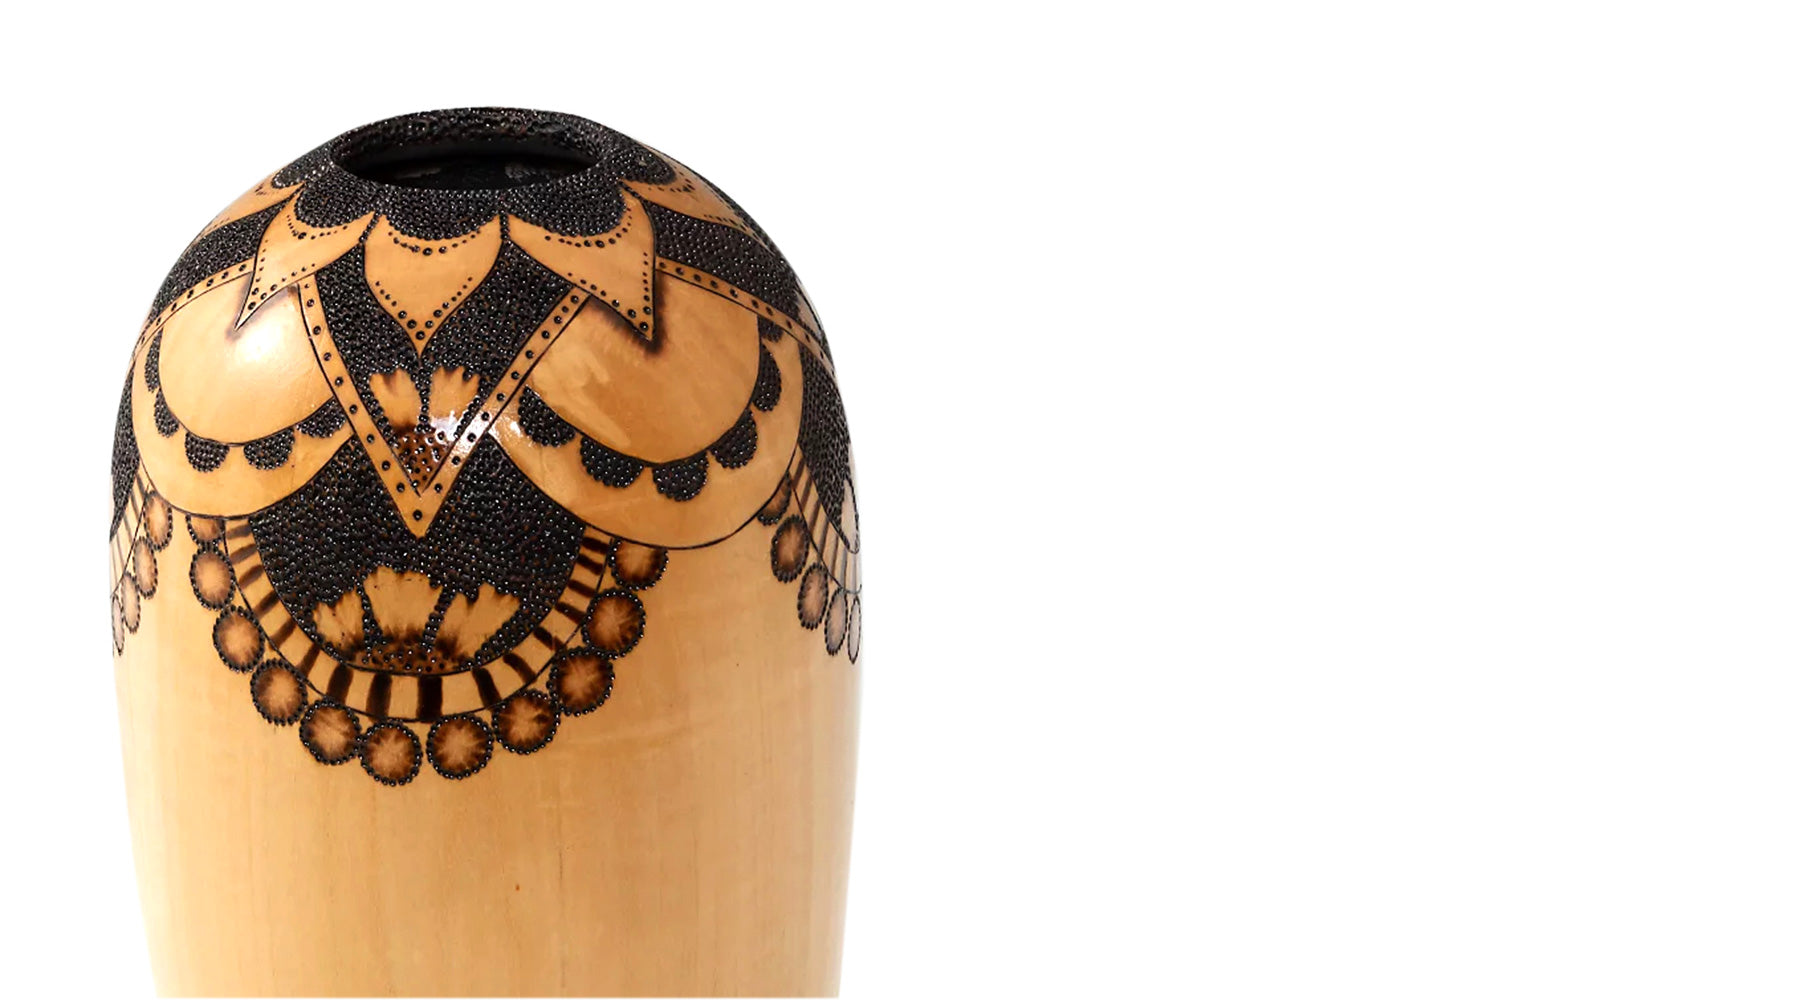 Light colored vase with  pyrography details